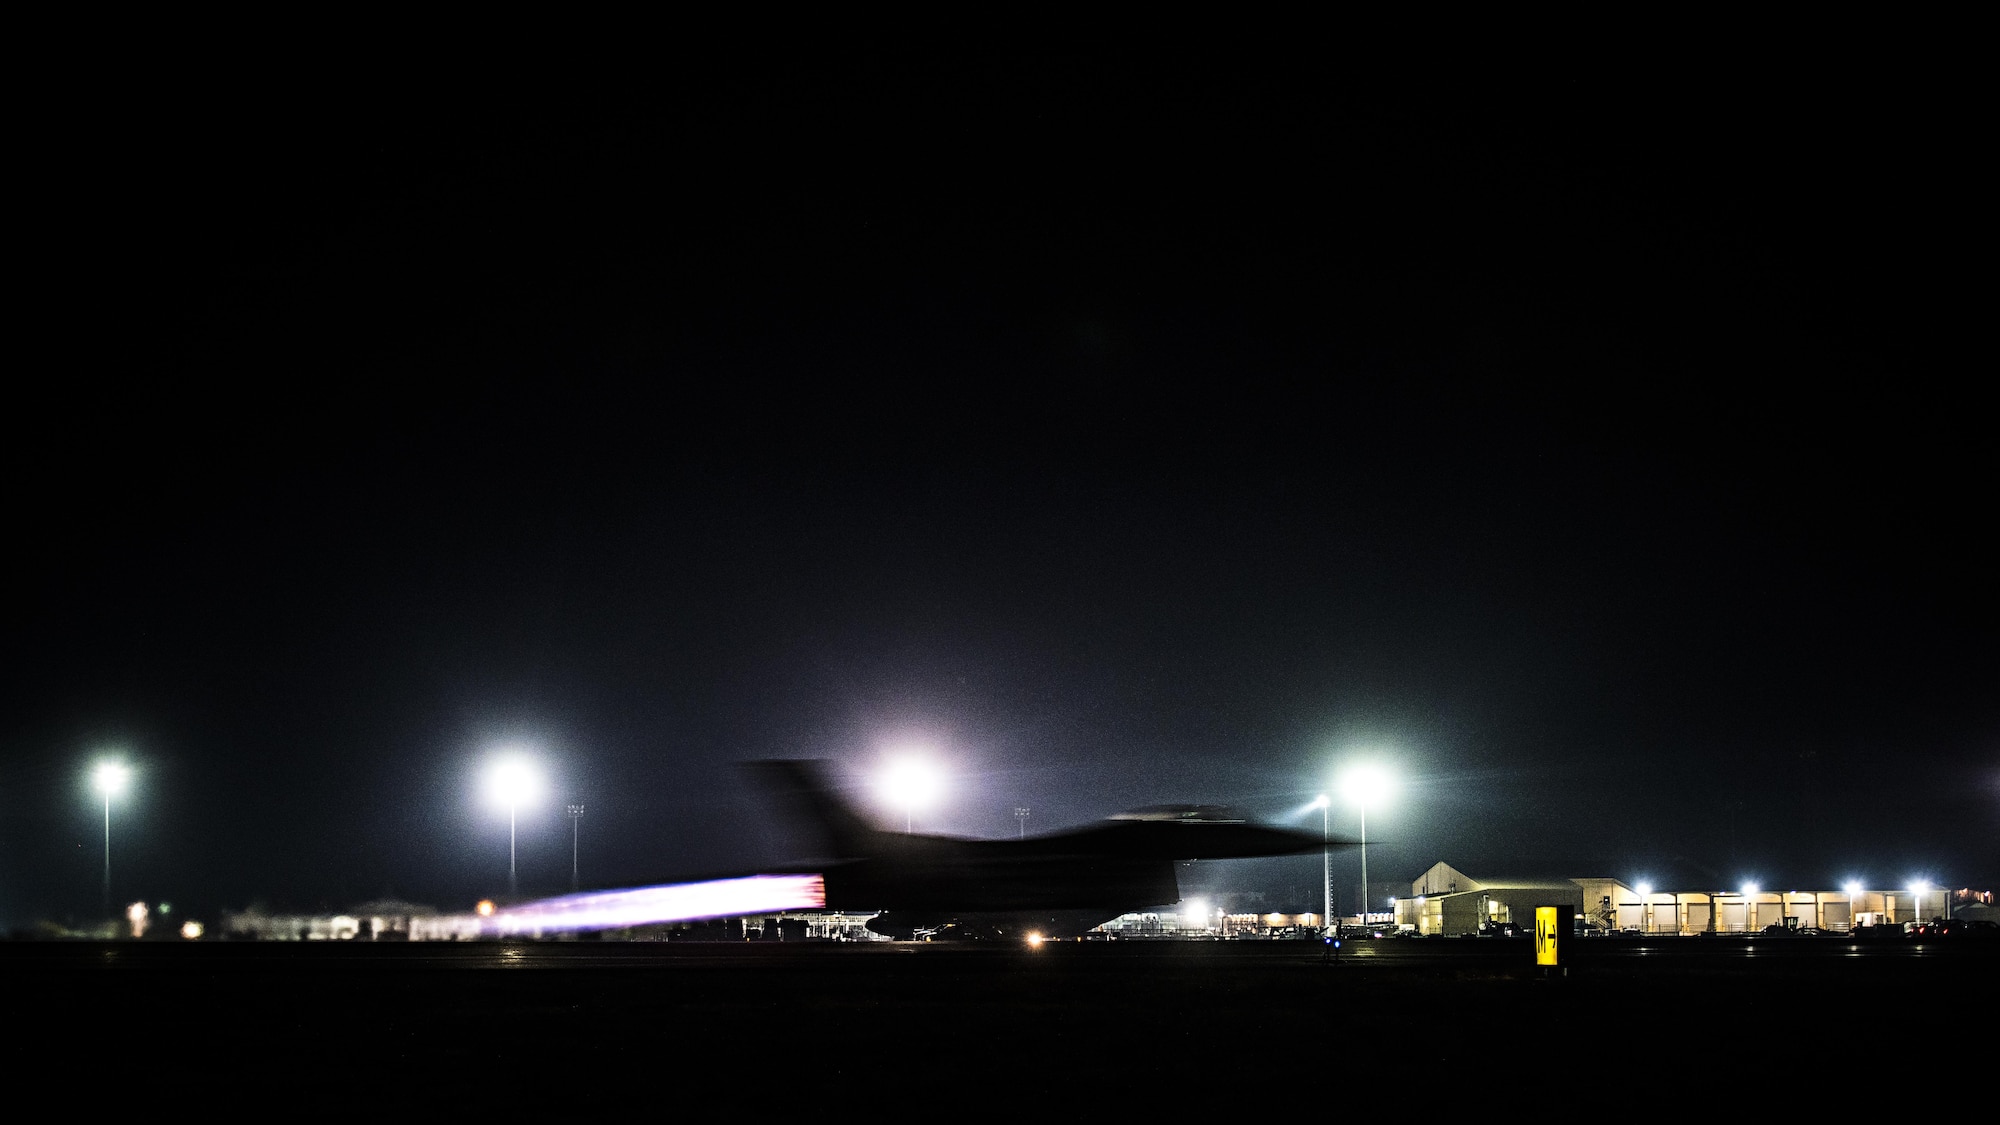 Capt. David, 79th Expeditionary Fighter Squadron pilot, takes off in an F-16 Fighting Falcon for a night mission Jan. 13, 2017 at Bagram Airfield, Afghanistan. David achieved his goal of becoming a pilot when he was accepted for officer training school in 2012 after being an enlisted maintainer for eight years. (U.S. Air Force photo by Staff Sgt. Katherine Spessa)